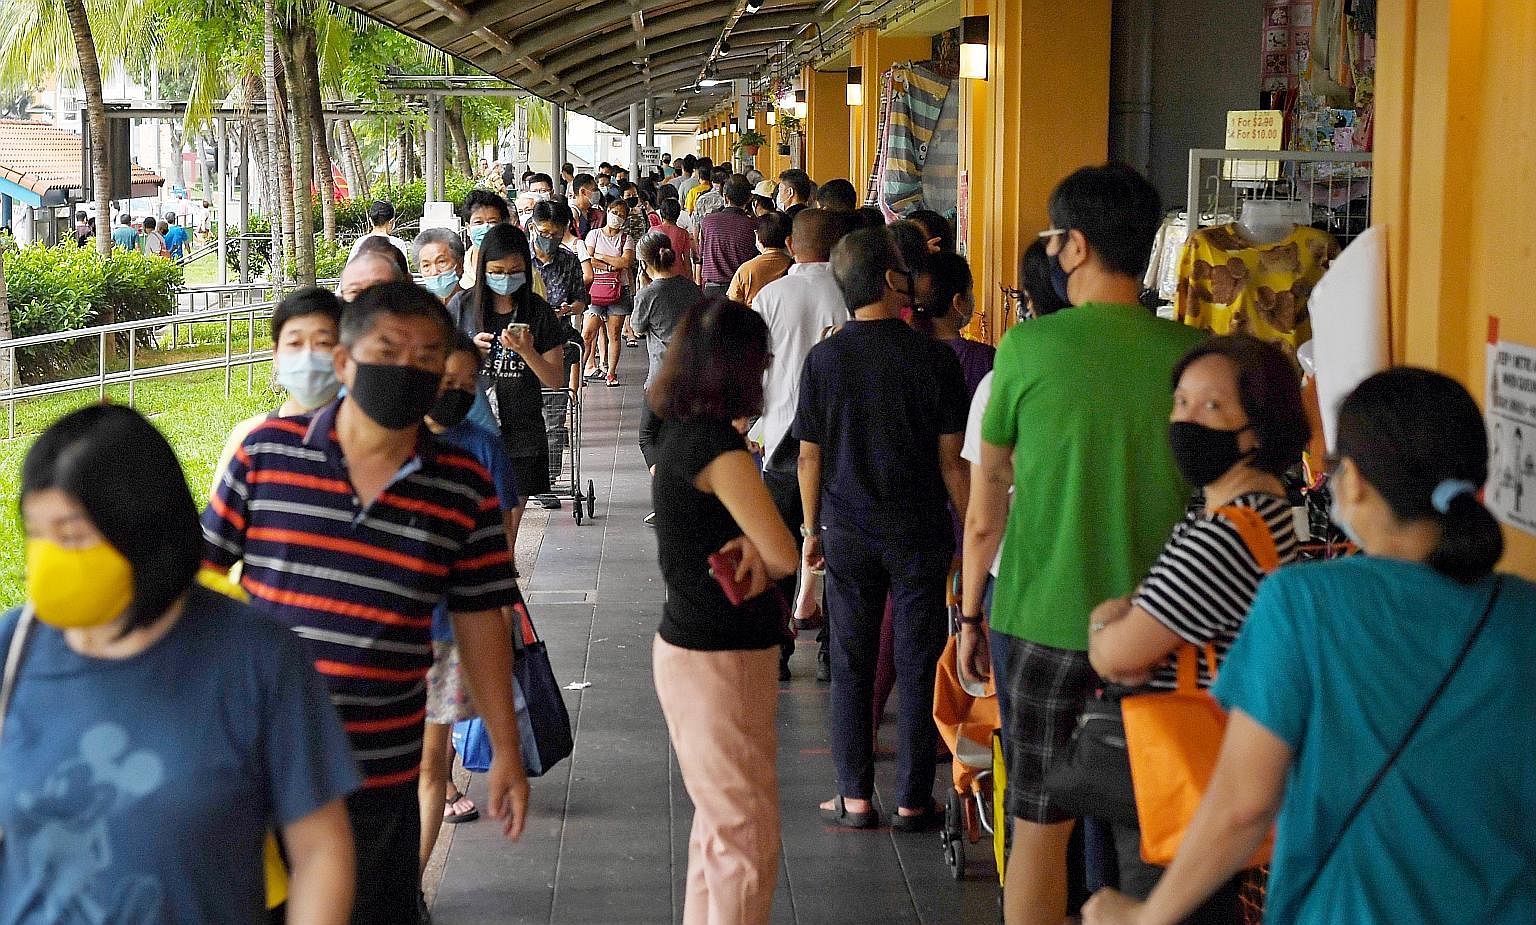 People queueing to enter a market in Hougang last Saturday. Right from the beginning of the crisis, the Government has systematically paid attention to the more vulnerable groups to look after them, says Prime Minister Lee Hsien Loong. ST PHOTO: KUA 